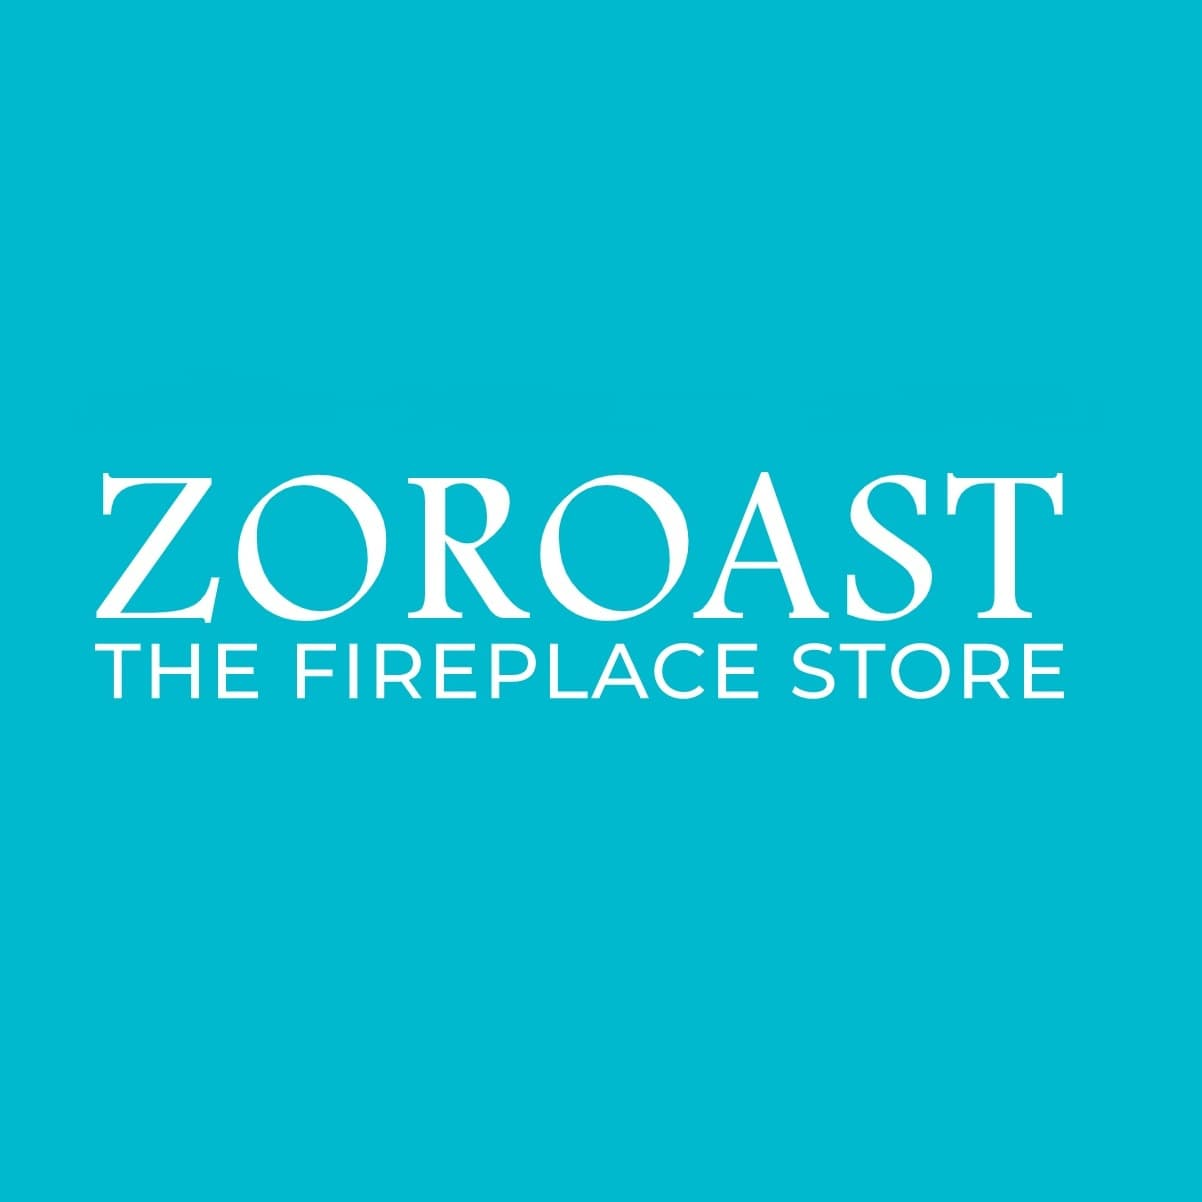 The Fireplace Store'